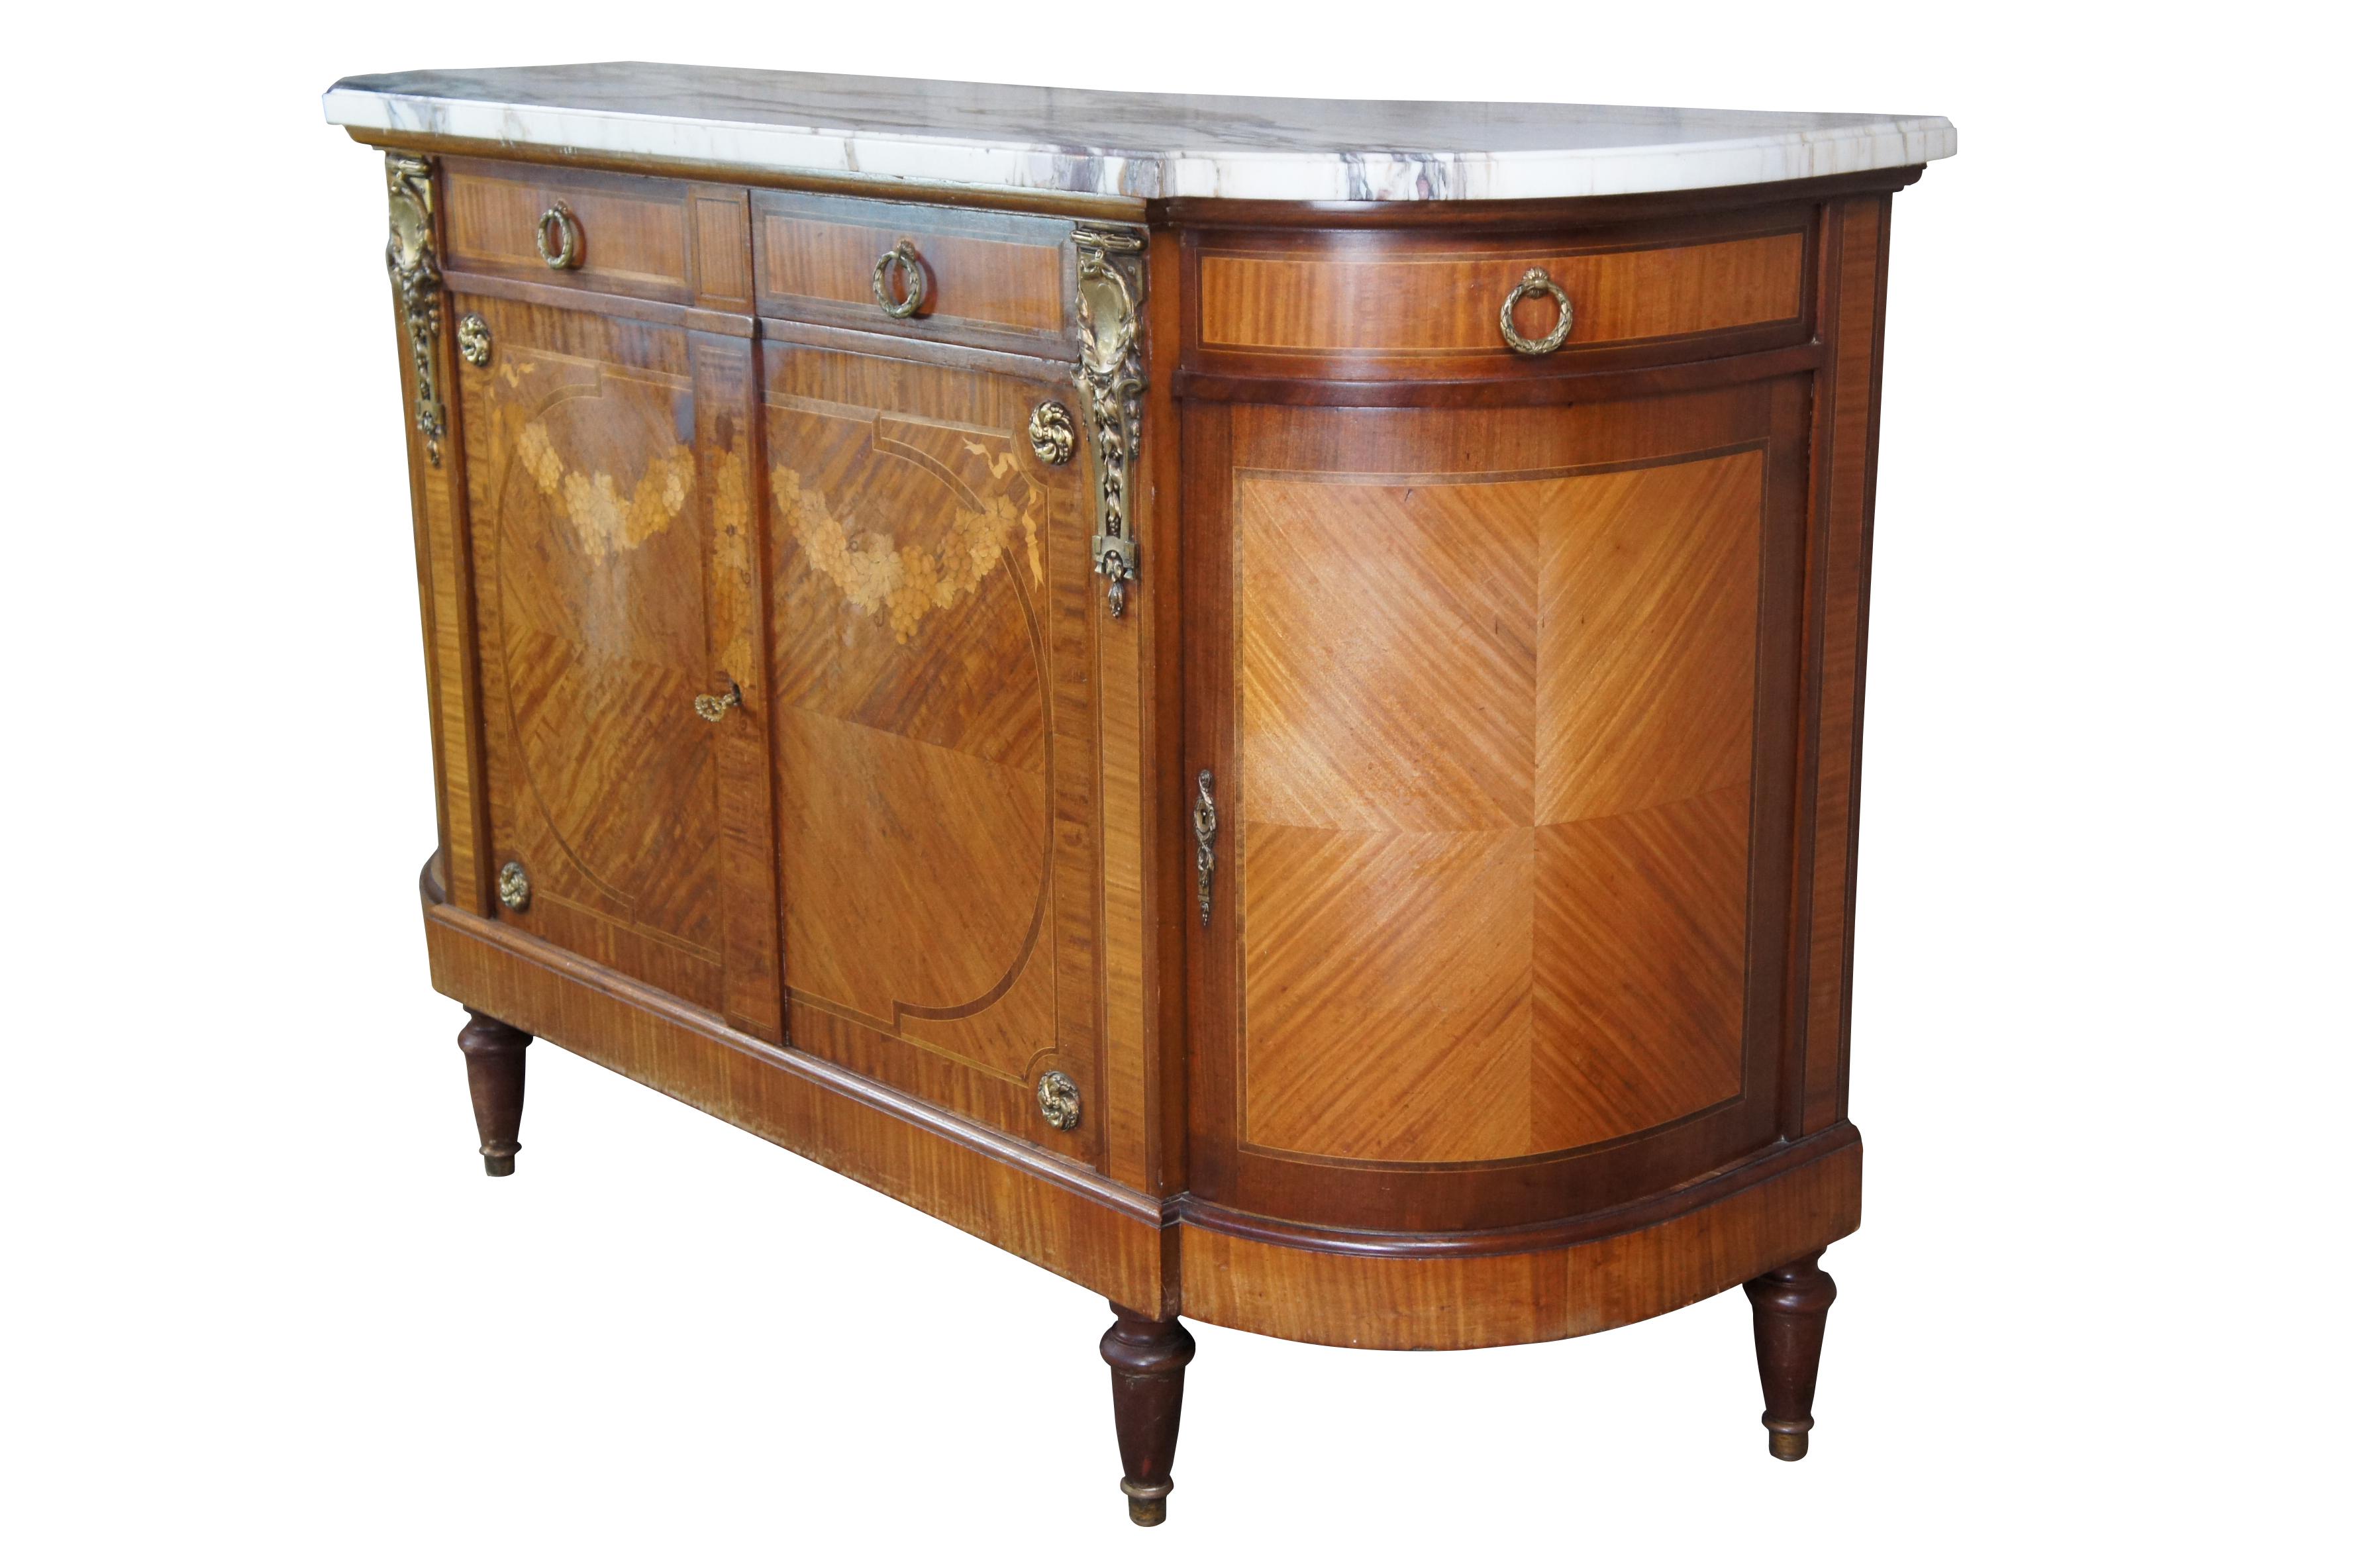 Antique French Louis XVI buffet featuring Neoclassical styling, circa 1870s. A crescent or D-form made from mahogany with a breakfront. Features ormalu mounts, a matchbook parquetry design, inlaid marquetry of grapes and leaves, banding and a marble